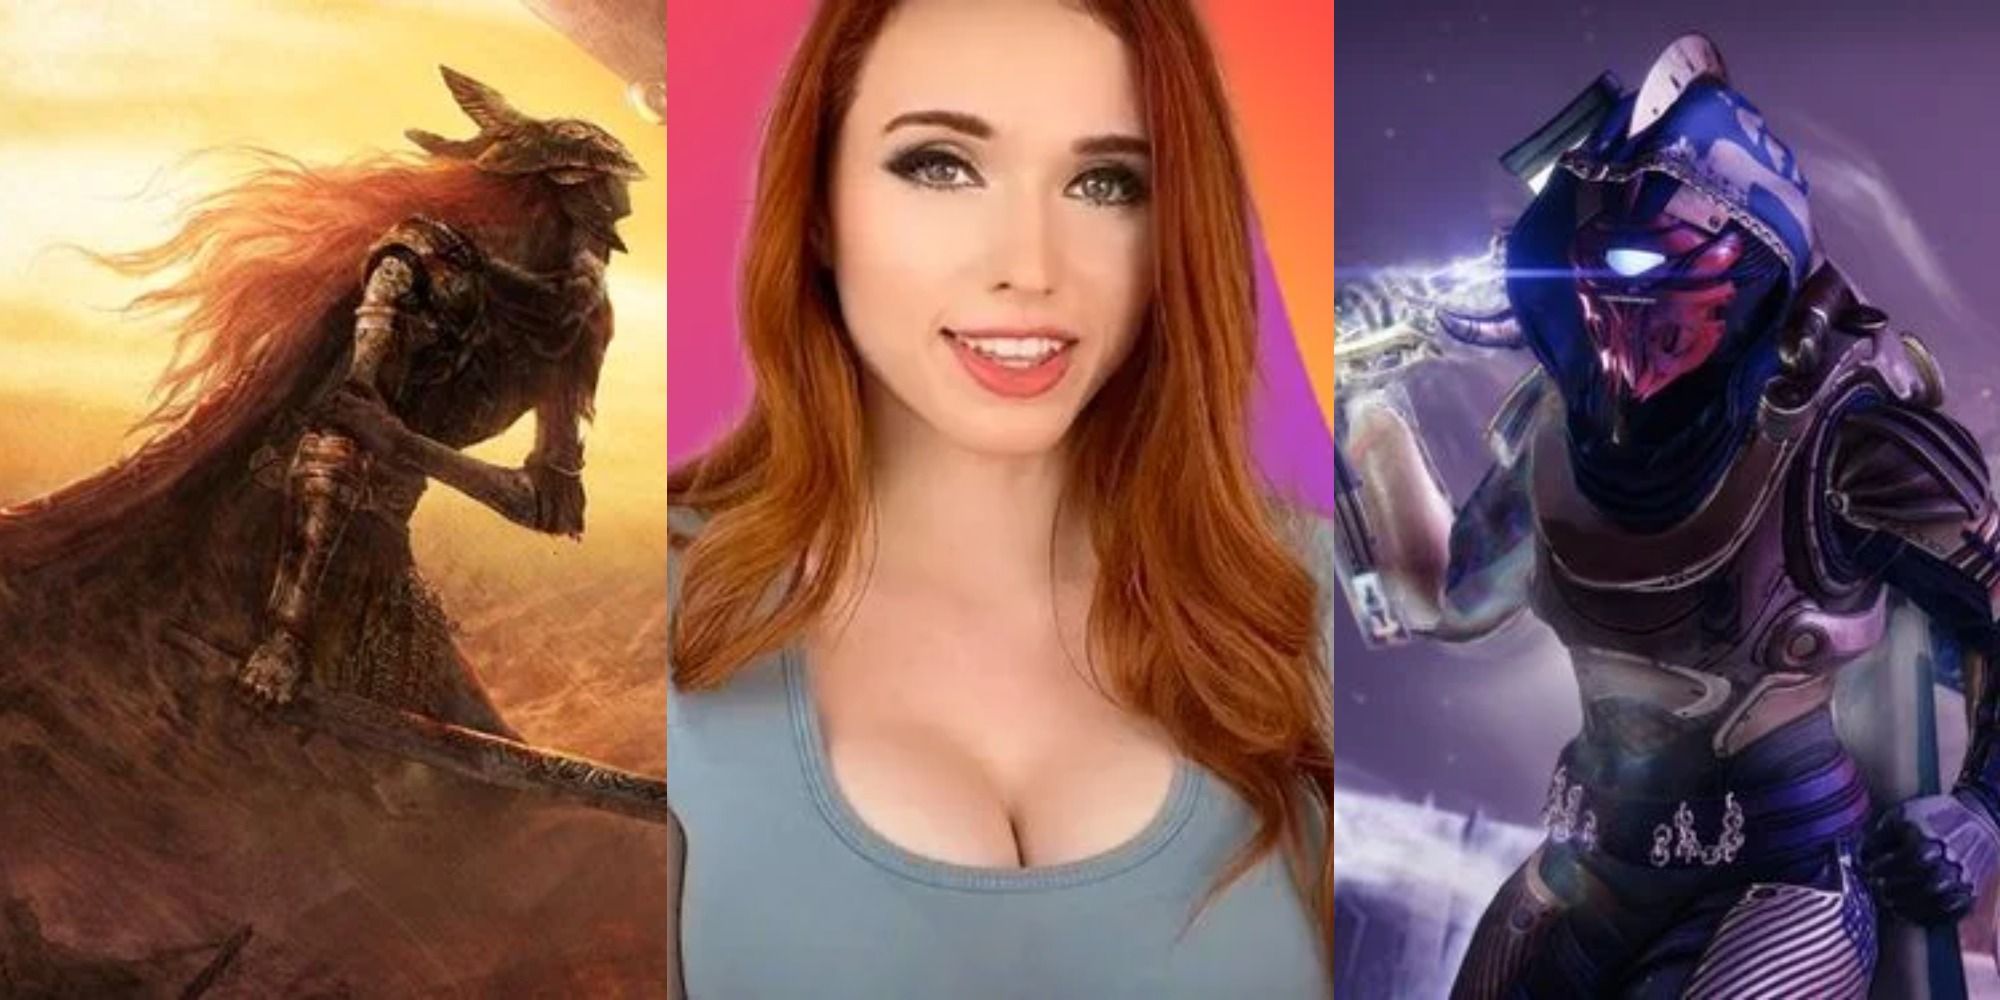 The Biggest Gaming News For March 28, 2022